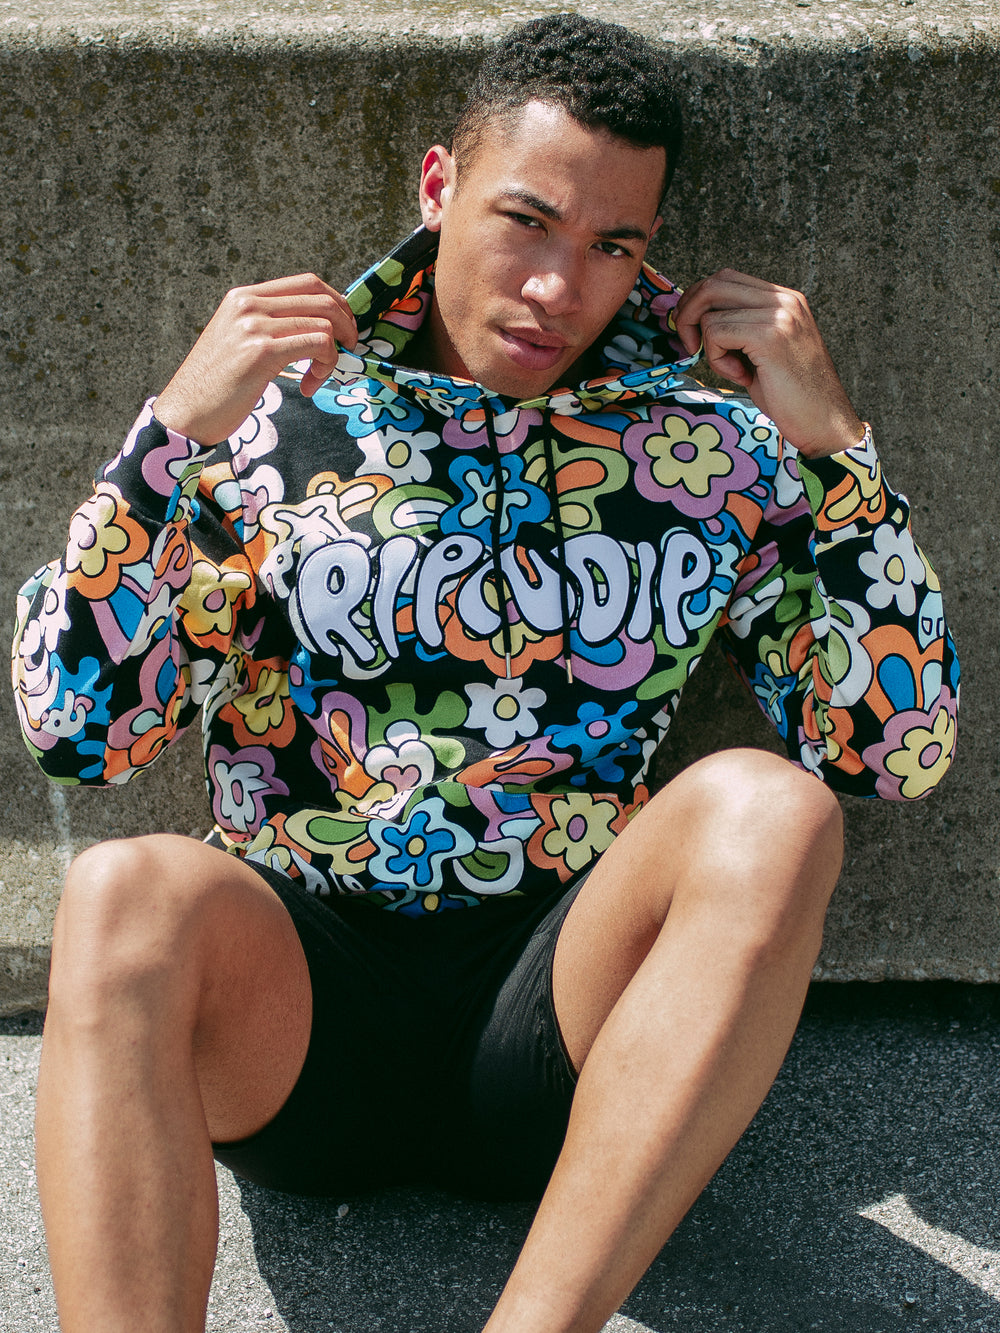 RIP N DIP FLOWER CHILD EMBROIDERED ART PULLOVER HOODIE - CLEARANCE